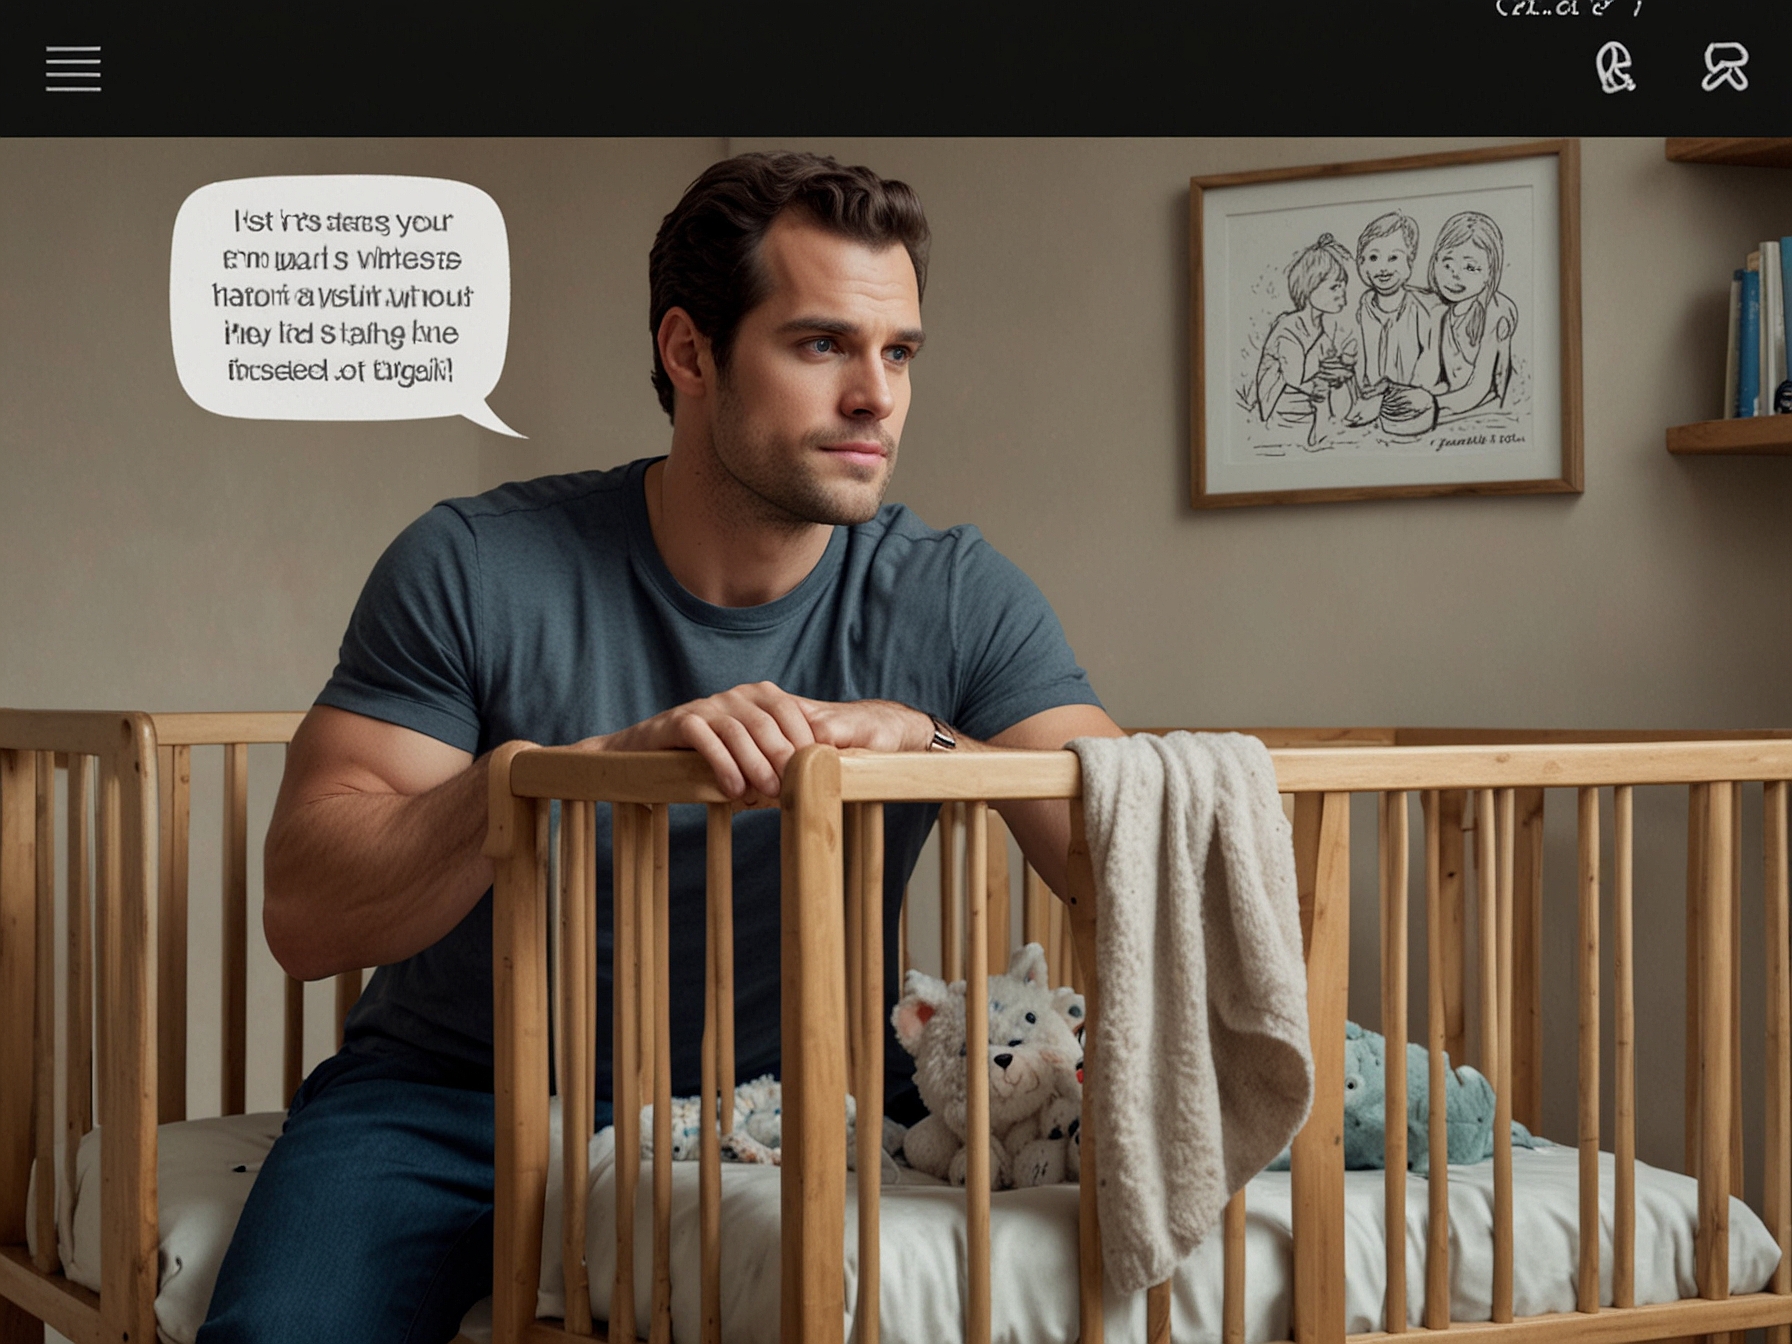 Screenshot of Henry Cavill's Instagram post, featuring a playful message asking for parenting tips alongside an image of a charming nursery with hobby items stored temporarily in the crib.